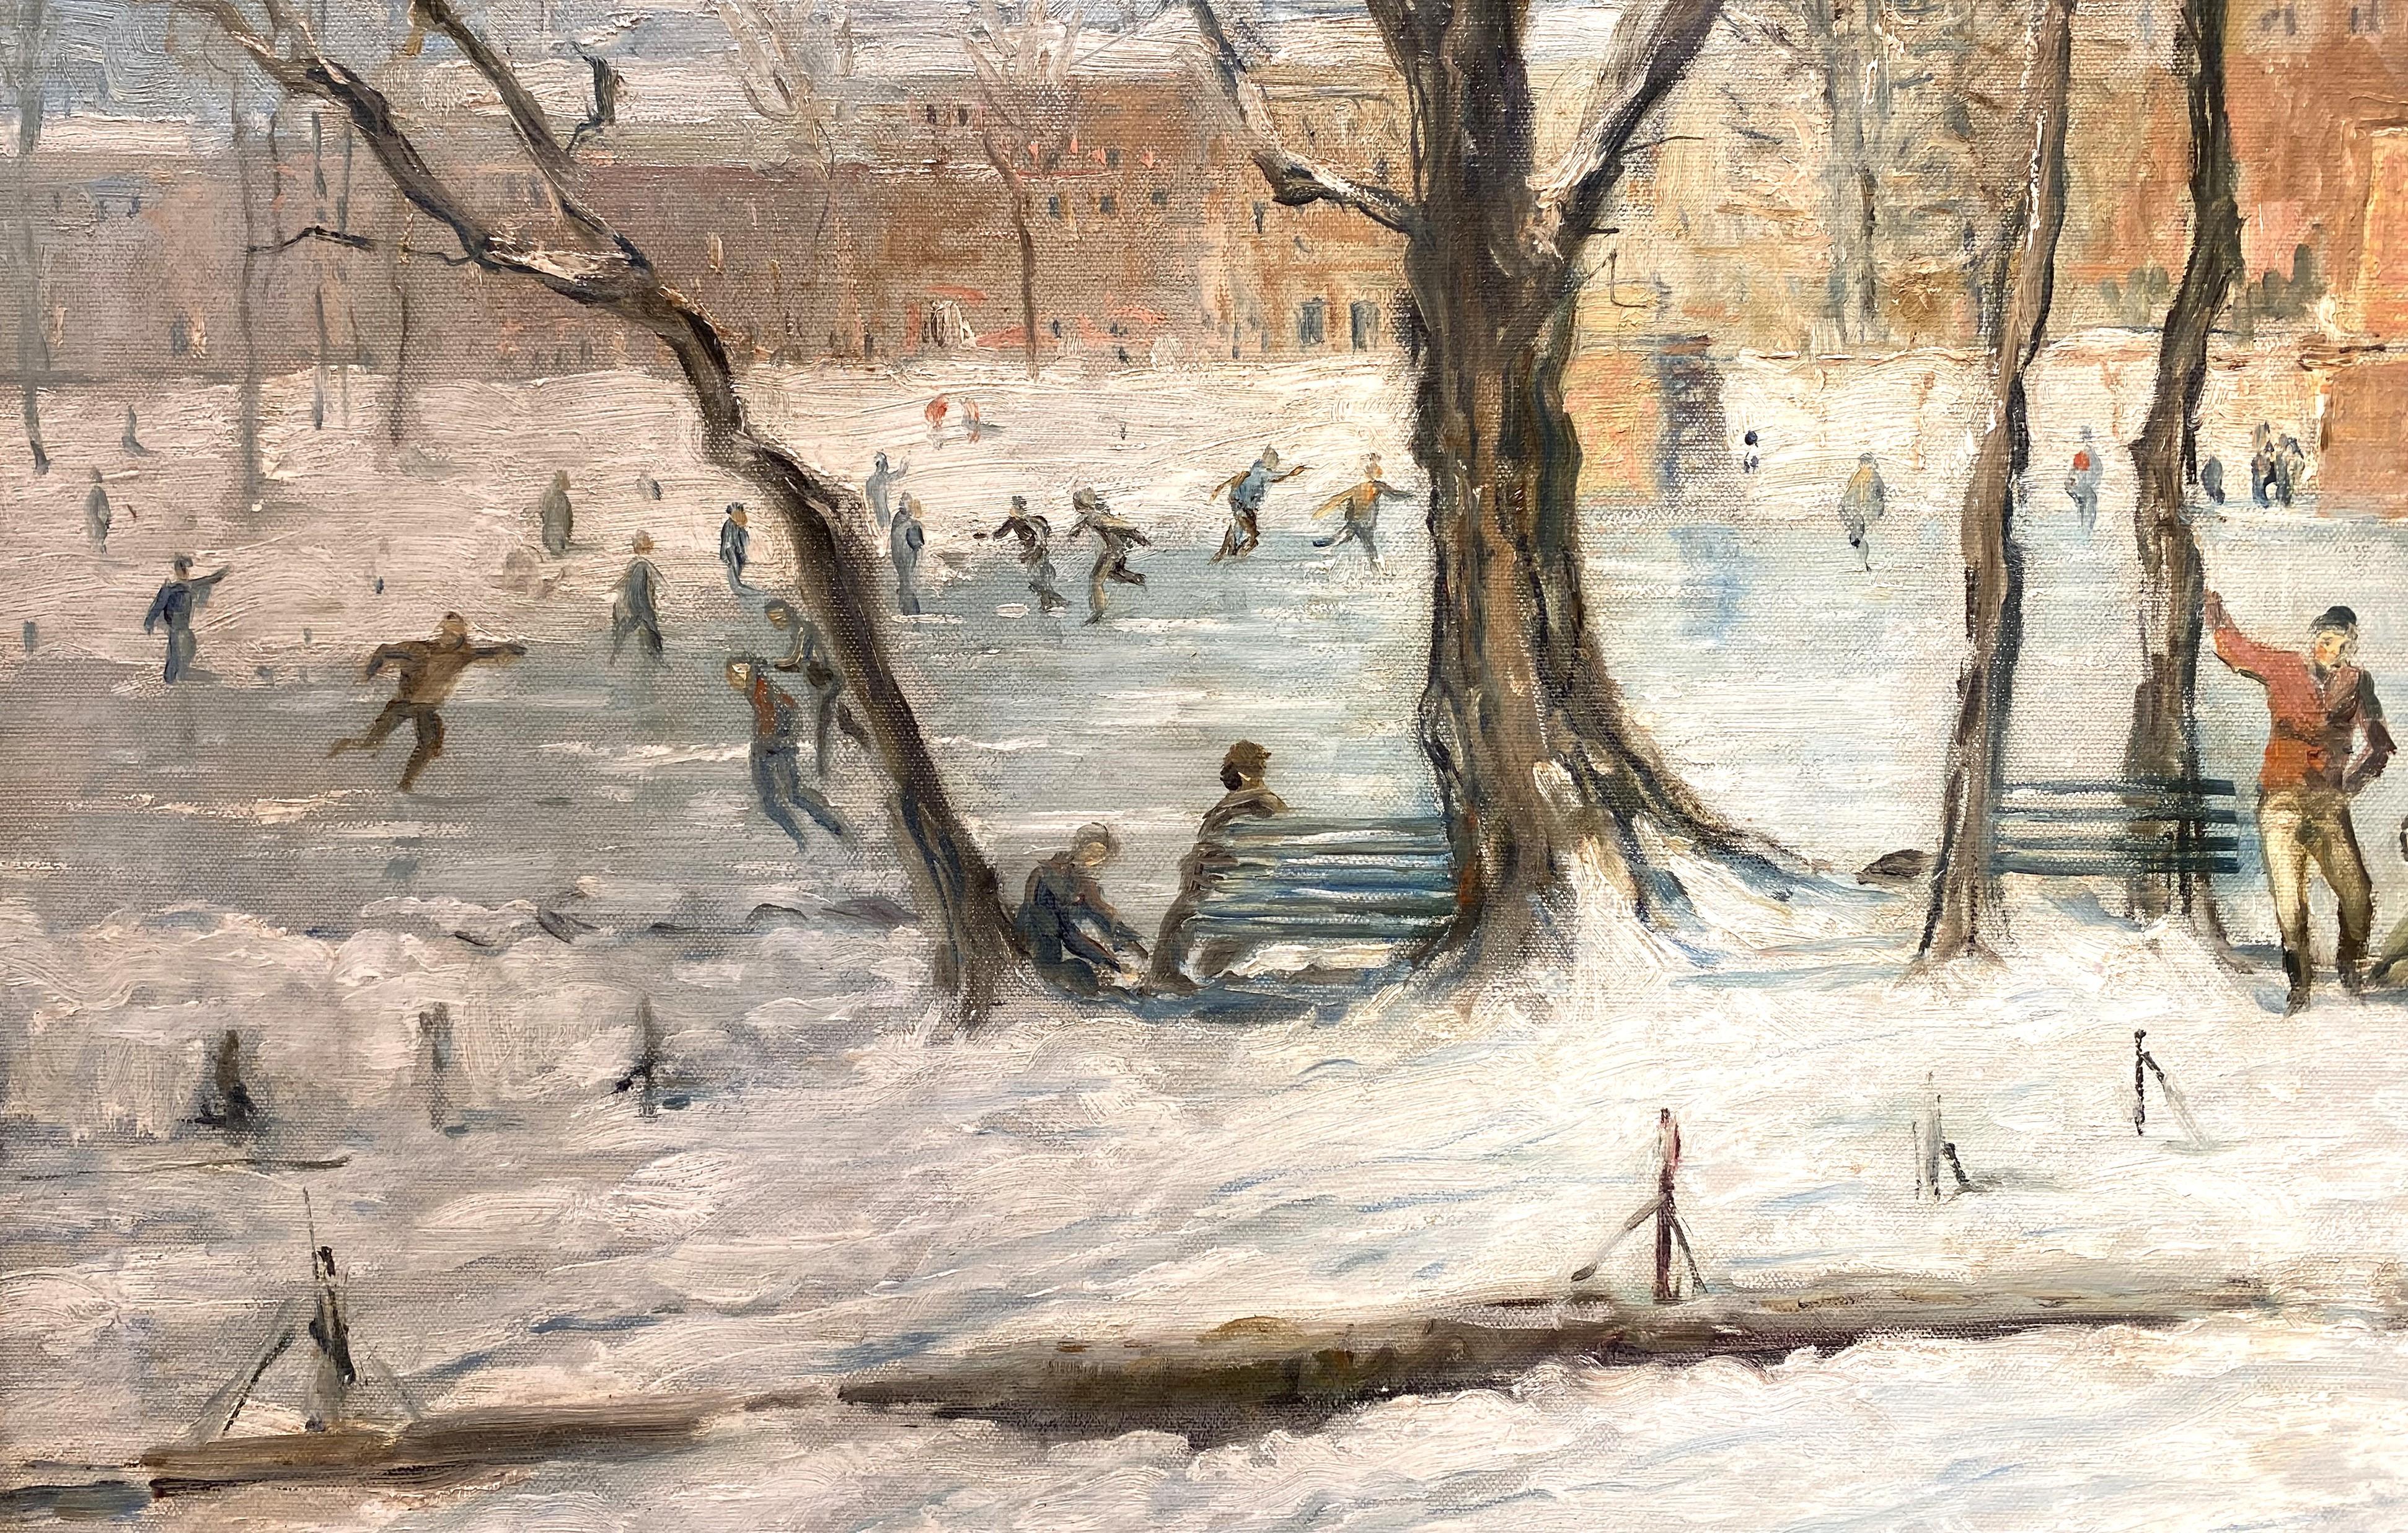 A fine winter cityscape with a fun scene of people skating in Boston by American artist (1864-1929). Born in Portsmouth, New Hampshire, Goodwin lived and worked most of his life in Massachusetts and New York, best known for his street and waterfront